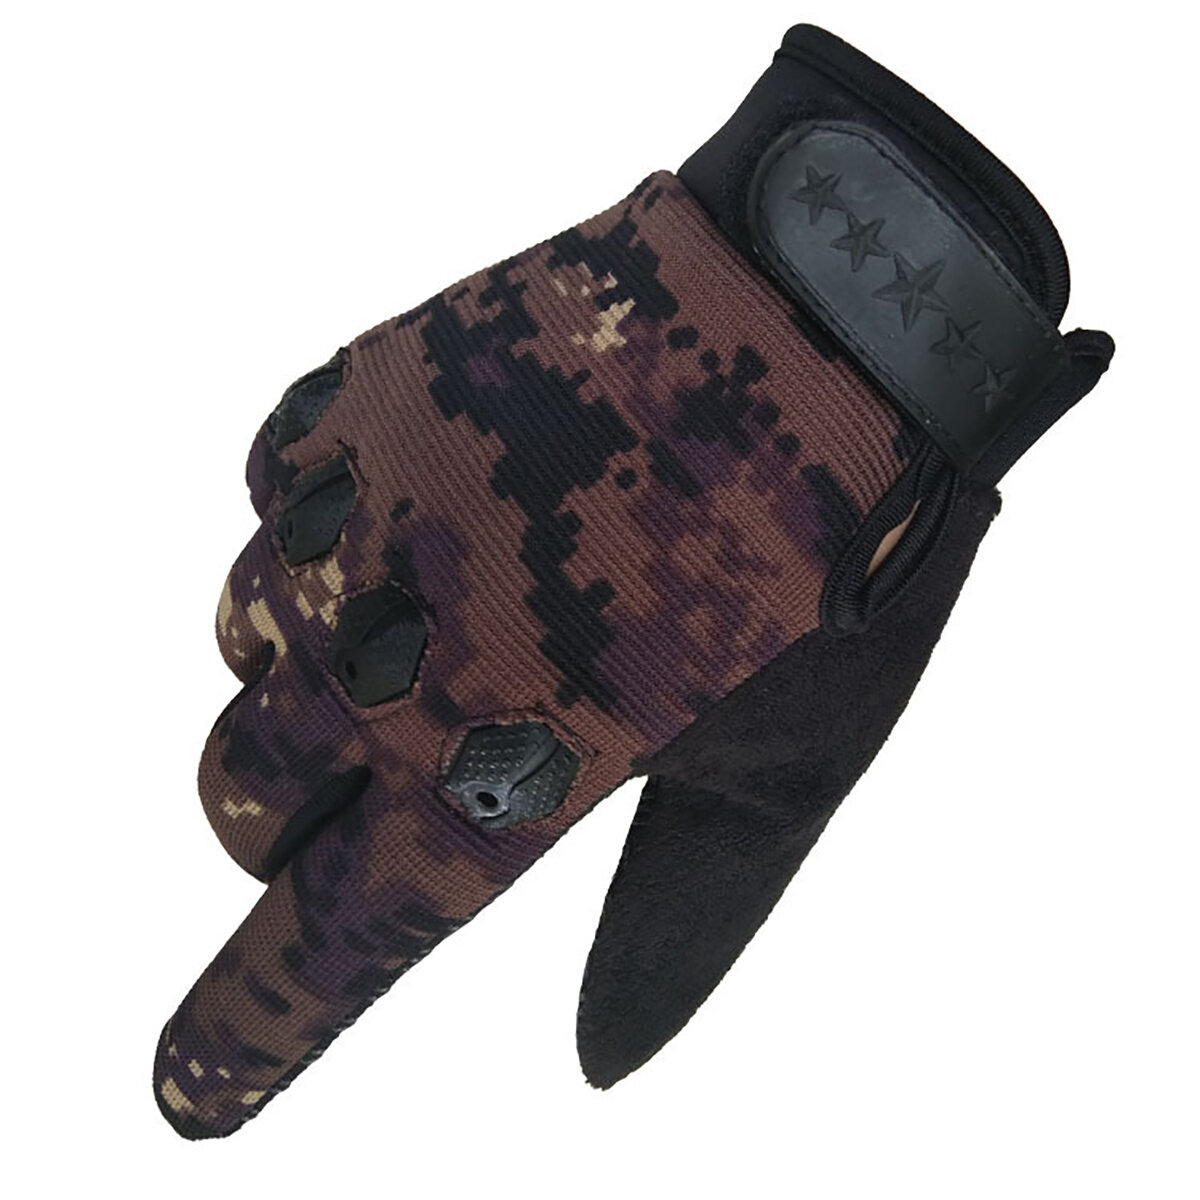 Anti-scratch Full Finger Tactical Gloves Military Army Outdoor Hunting Cycling